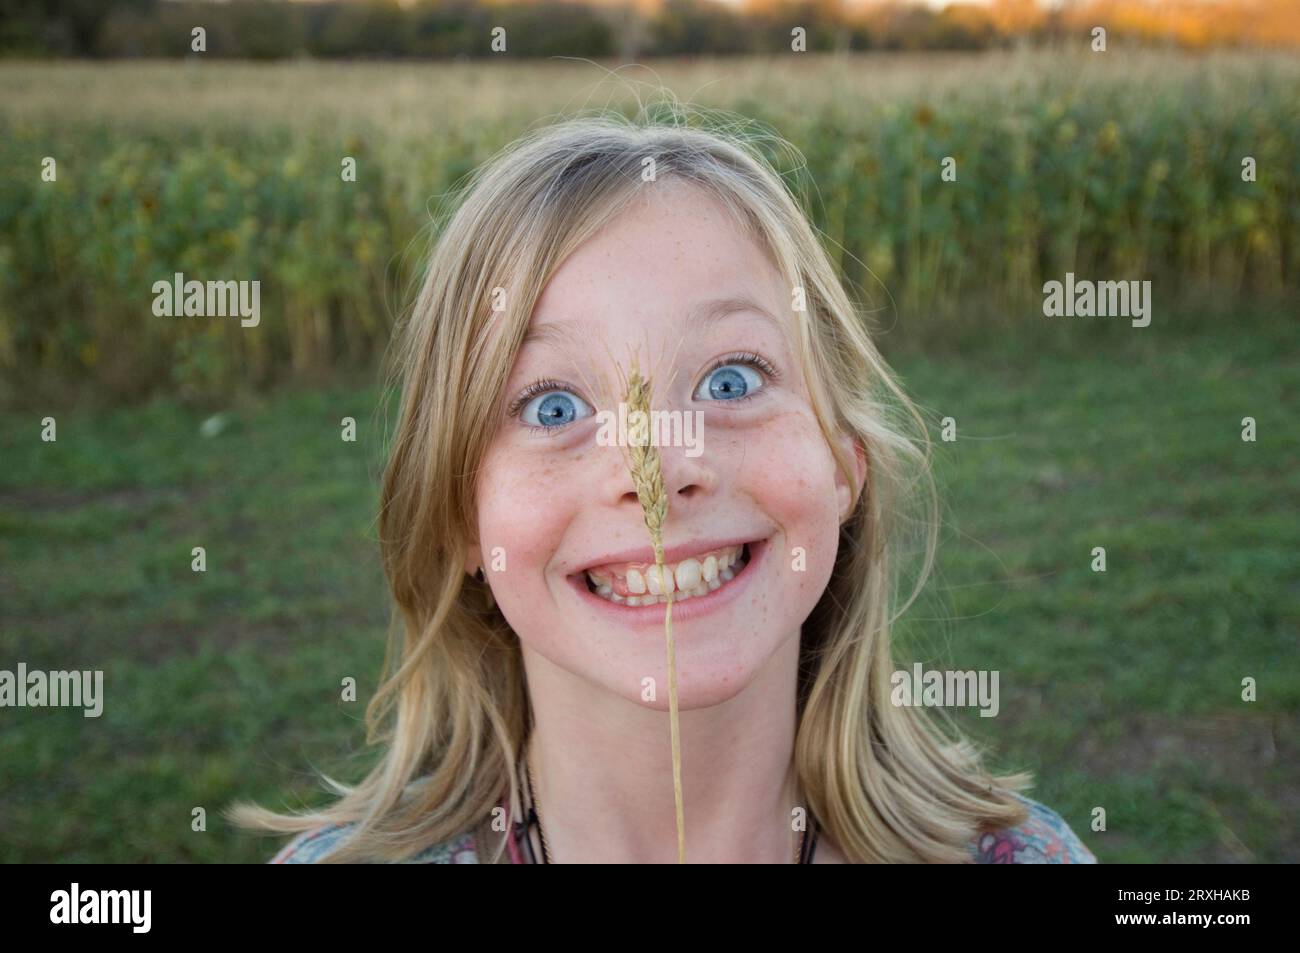 Young girl holds a piece of wheat up to her big blue eyes; Roca, Nebraska, United States of America Stock Photo